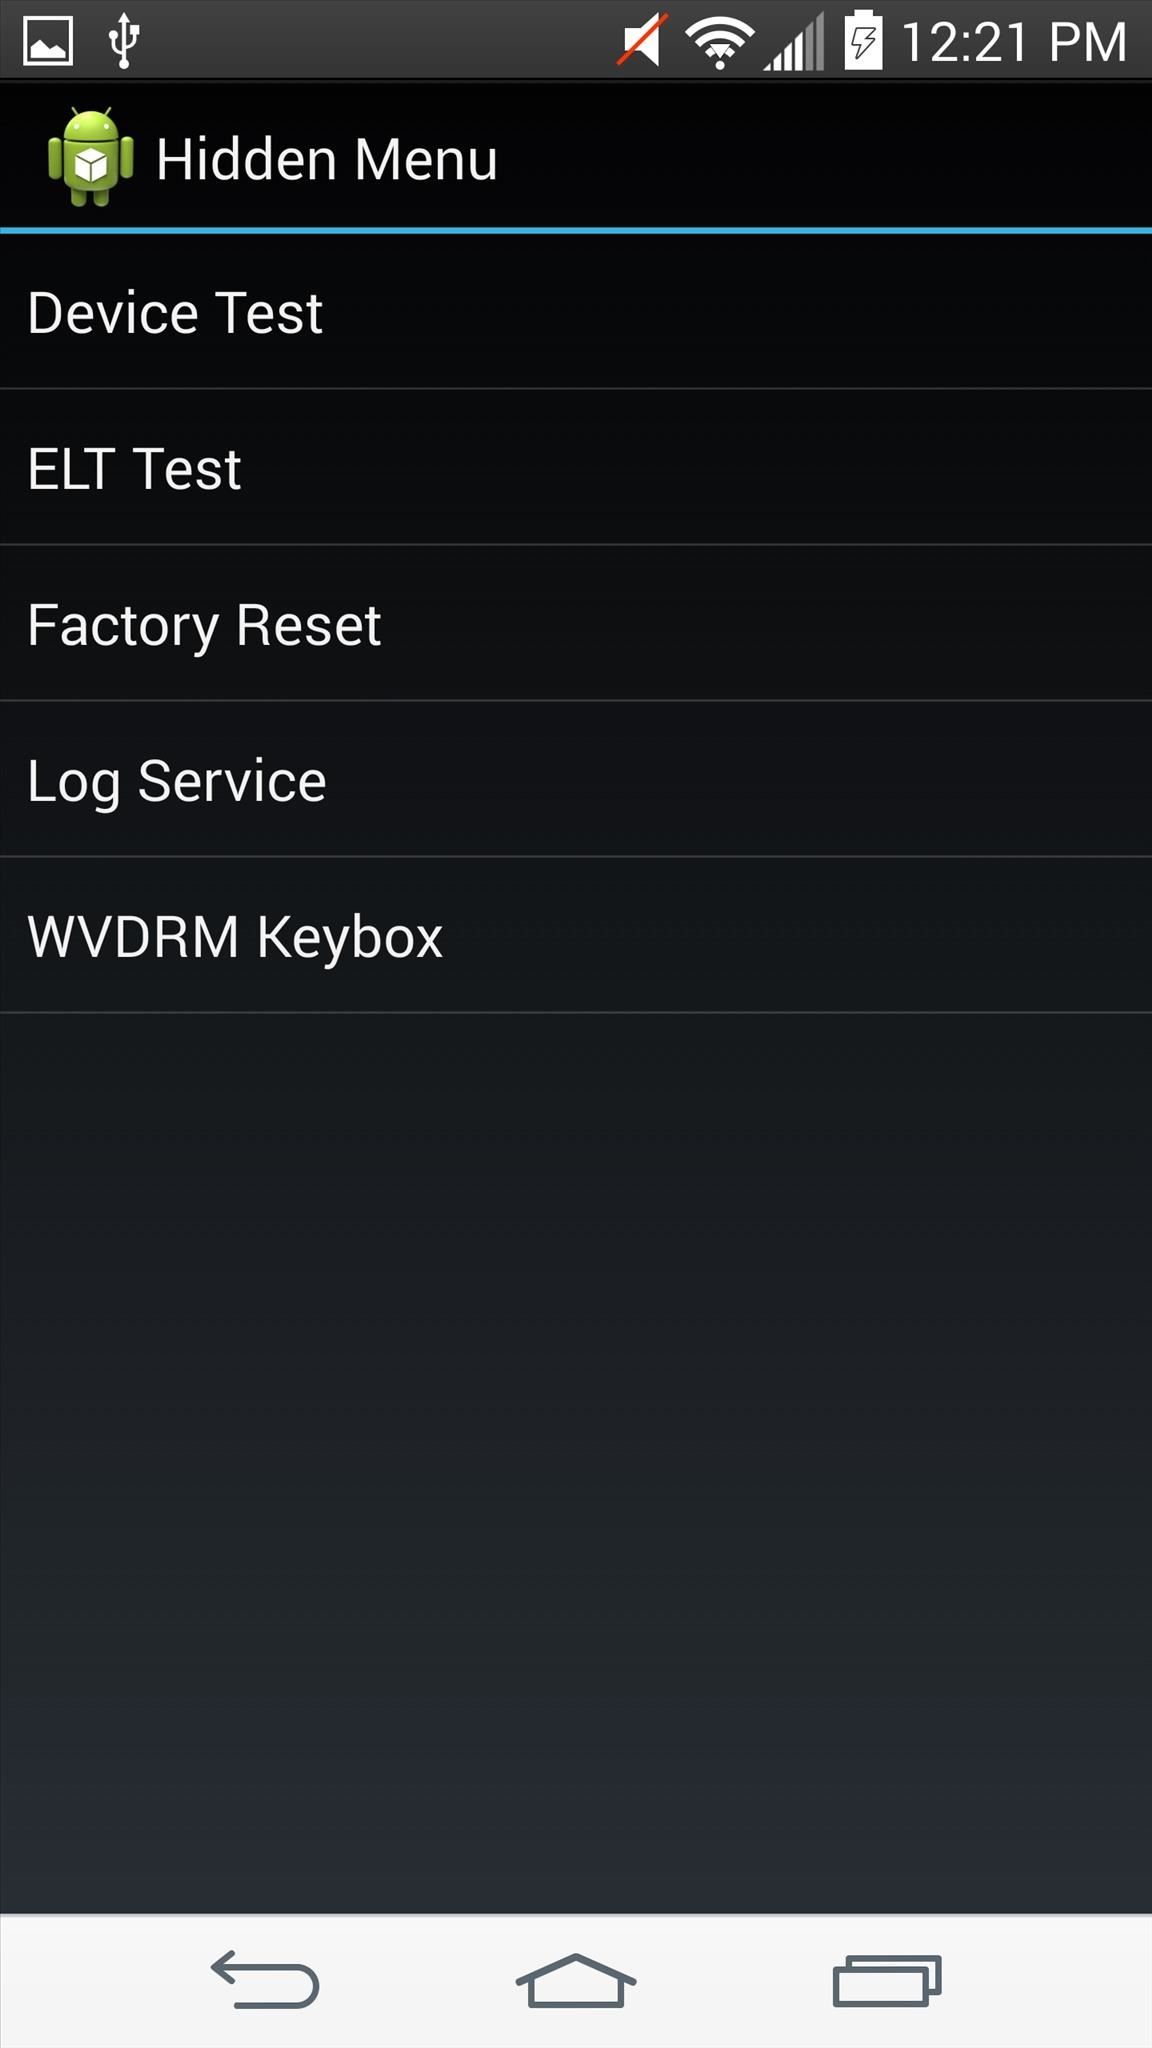 How to Unlock the Hidden Menu & Run a Diagnostic Test on Your LG G3